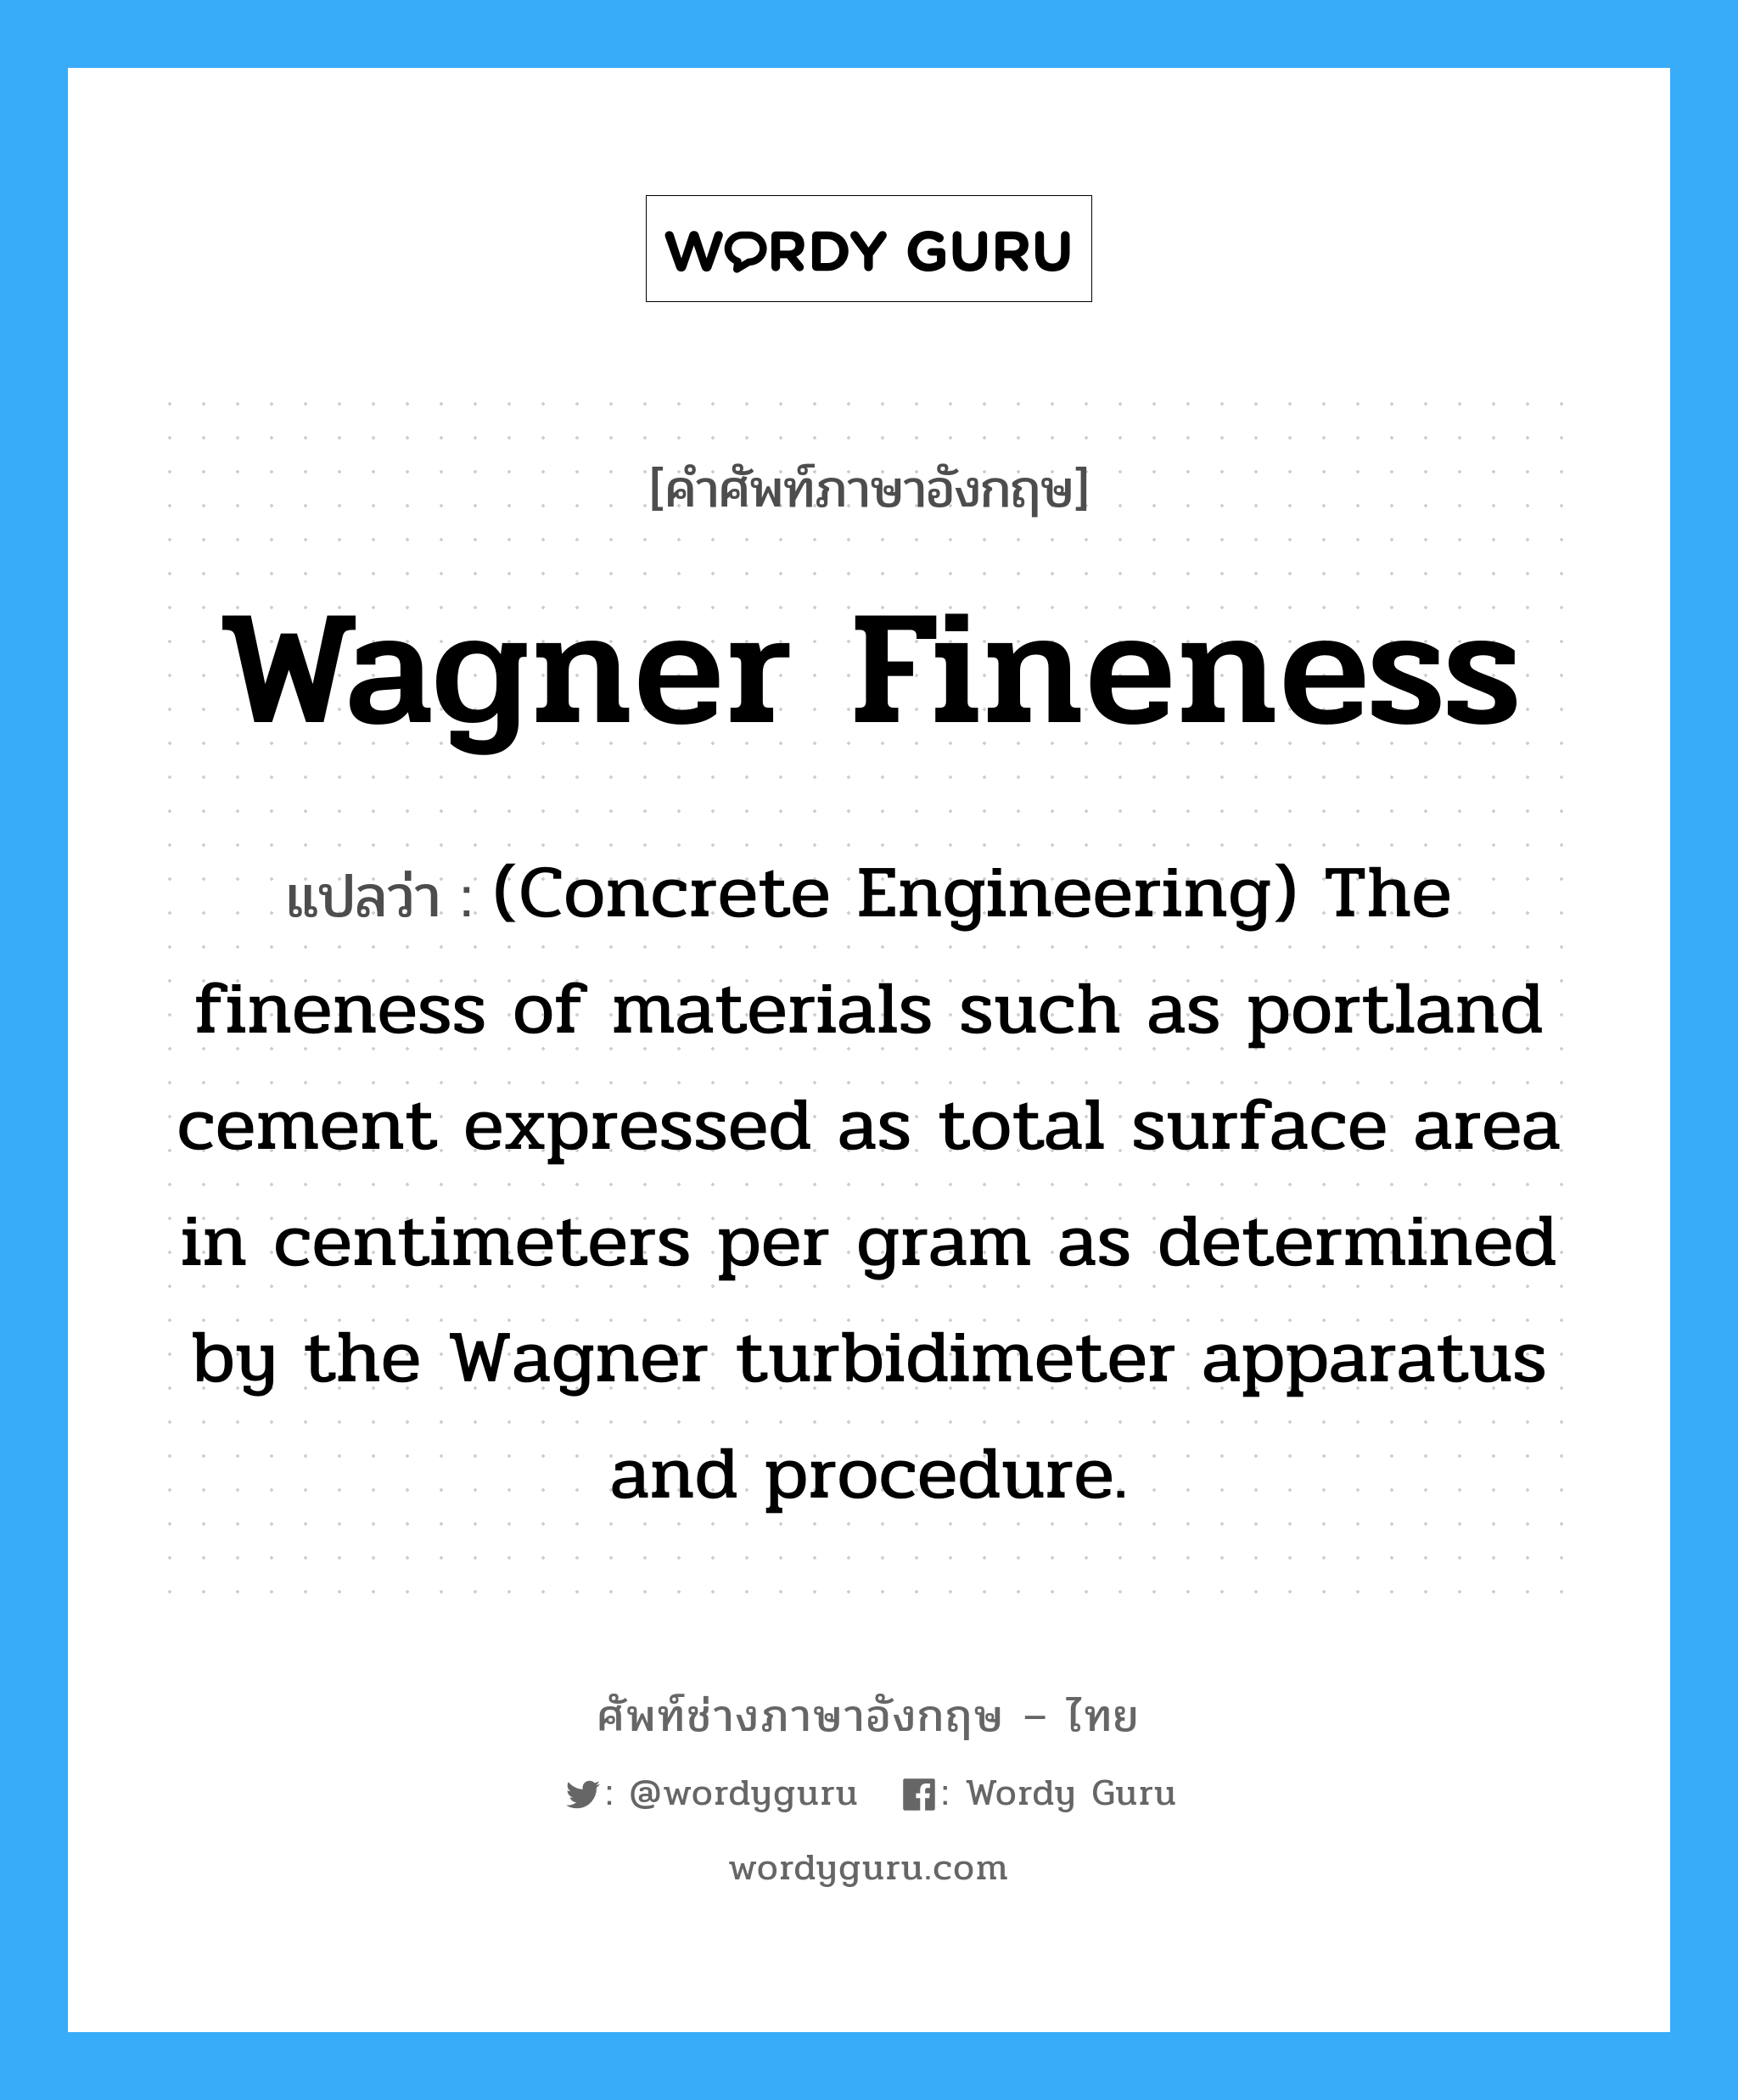 (Concrete Engineering) The fineness of materials such as portland cement expressed as total surface area in centimeters per gram as determined by the Wagner turbidimeter apparatus and procedure. ภาษาอังกฤษ?, คำศัพท์ช่างภาษาอังกฤษ - ไทย (Concrete Engineering) The fineness of materials such as portland cement expressed as total surface area in centimeters per gram as determined by the Wagner turbidimeter apparatus and procedure. คำศัพท์ภาษาอังกฤษ (Concrete Engineering) The fineness of materials such as portland cement expressed as total surface area in centimeters per gram as determined by the Wagner turbidimeter apparatus and procedure. แปลว่า Wagner Fineness